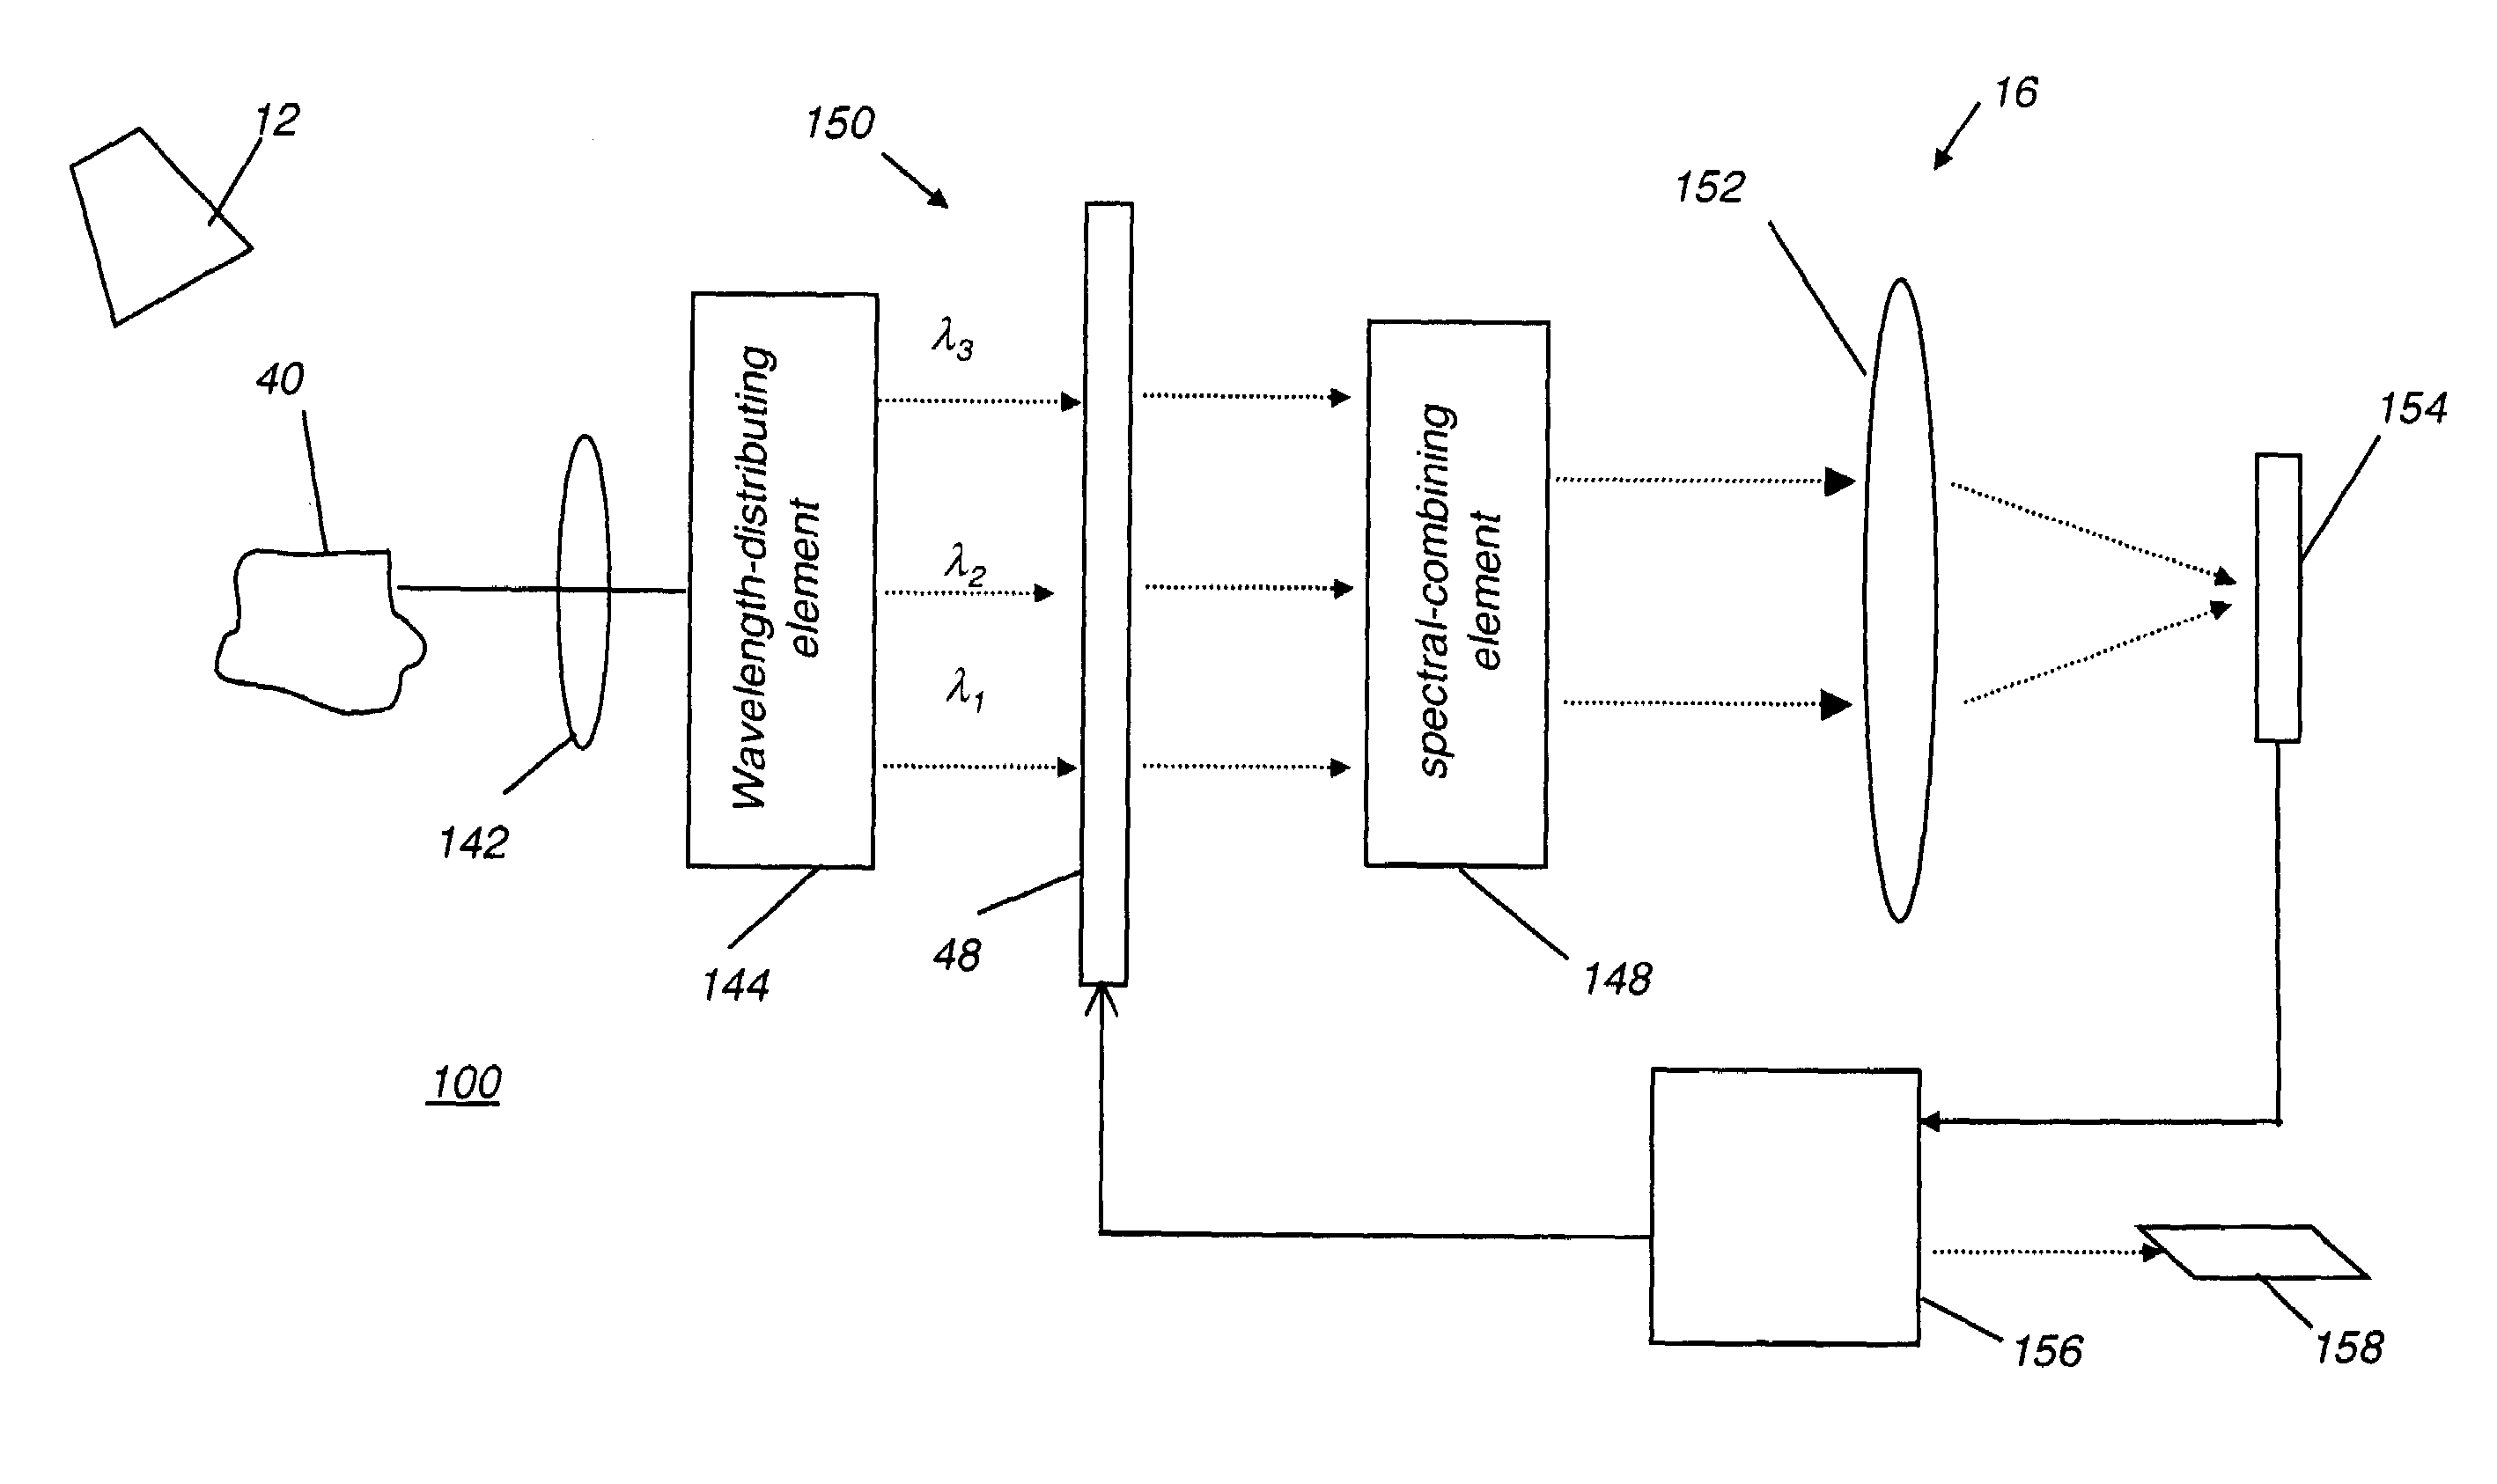 Programmable spectral imaging system